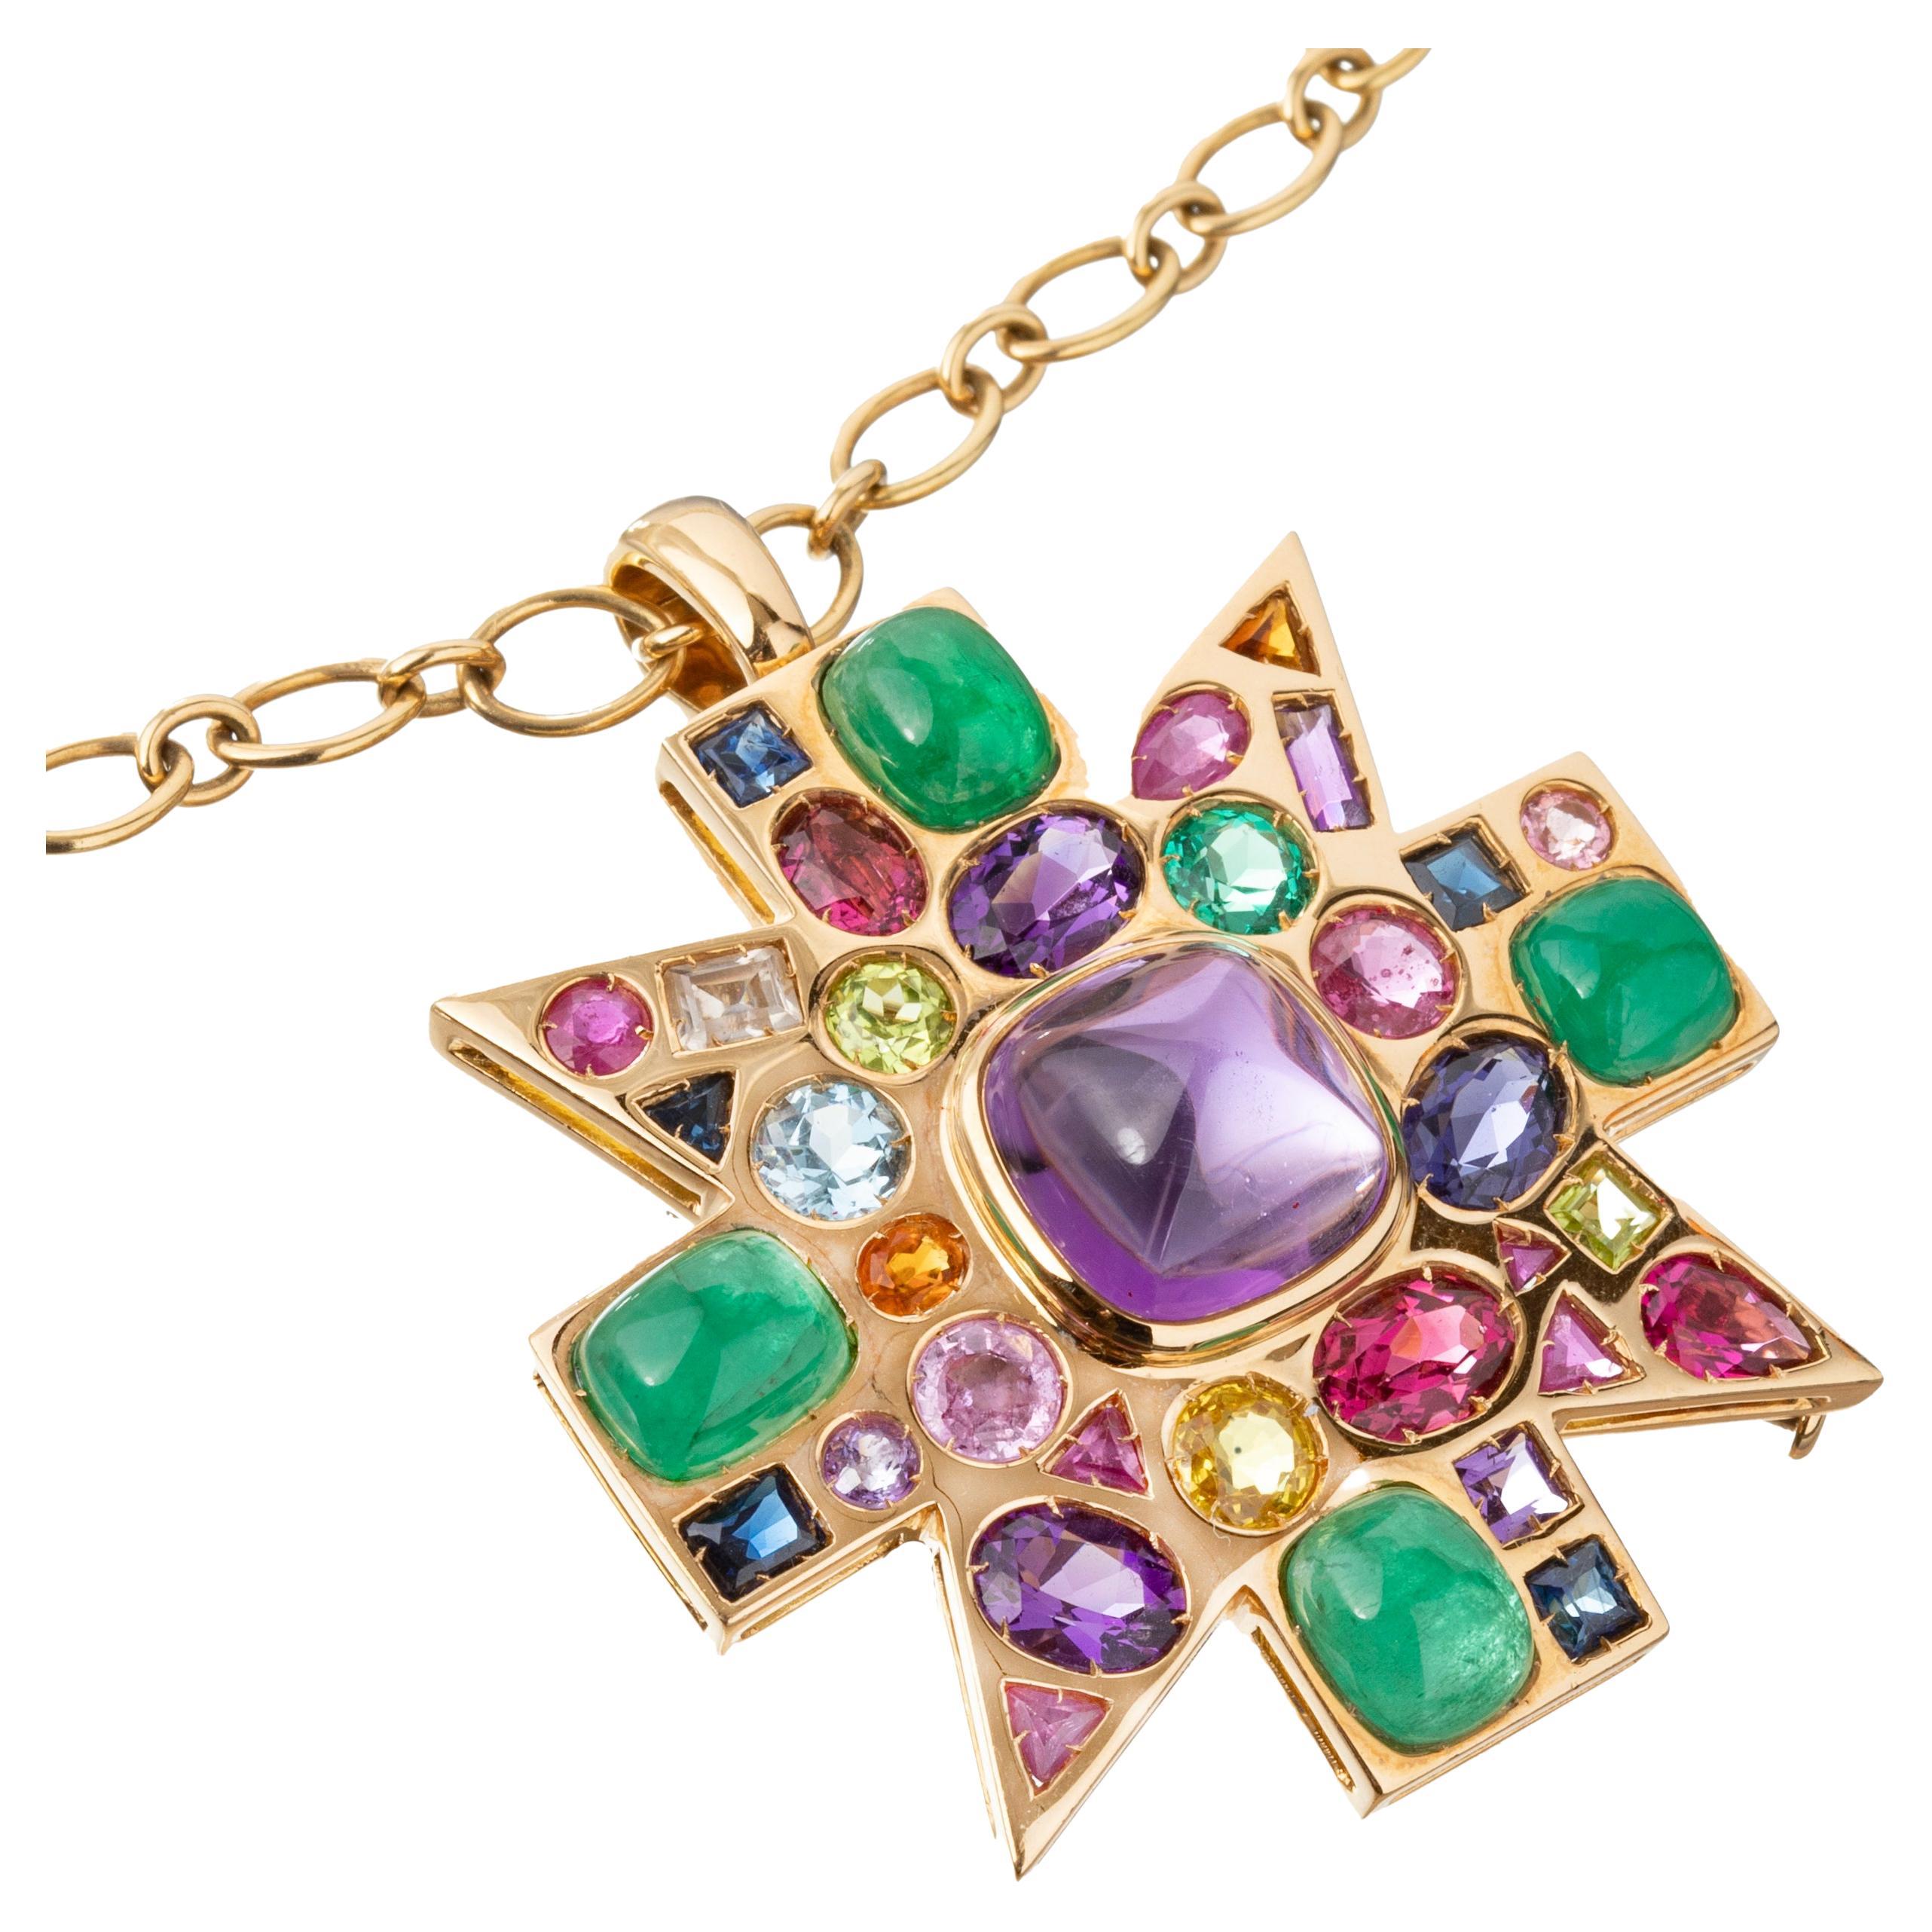 Verdura Byzantine Pendant Brooch with Chain Necklace